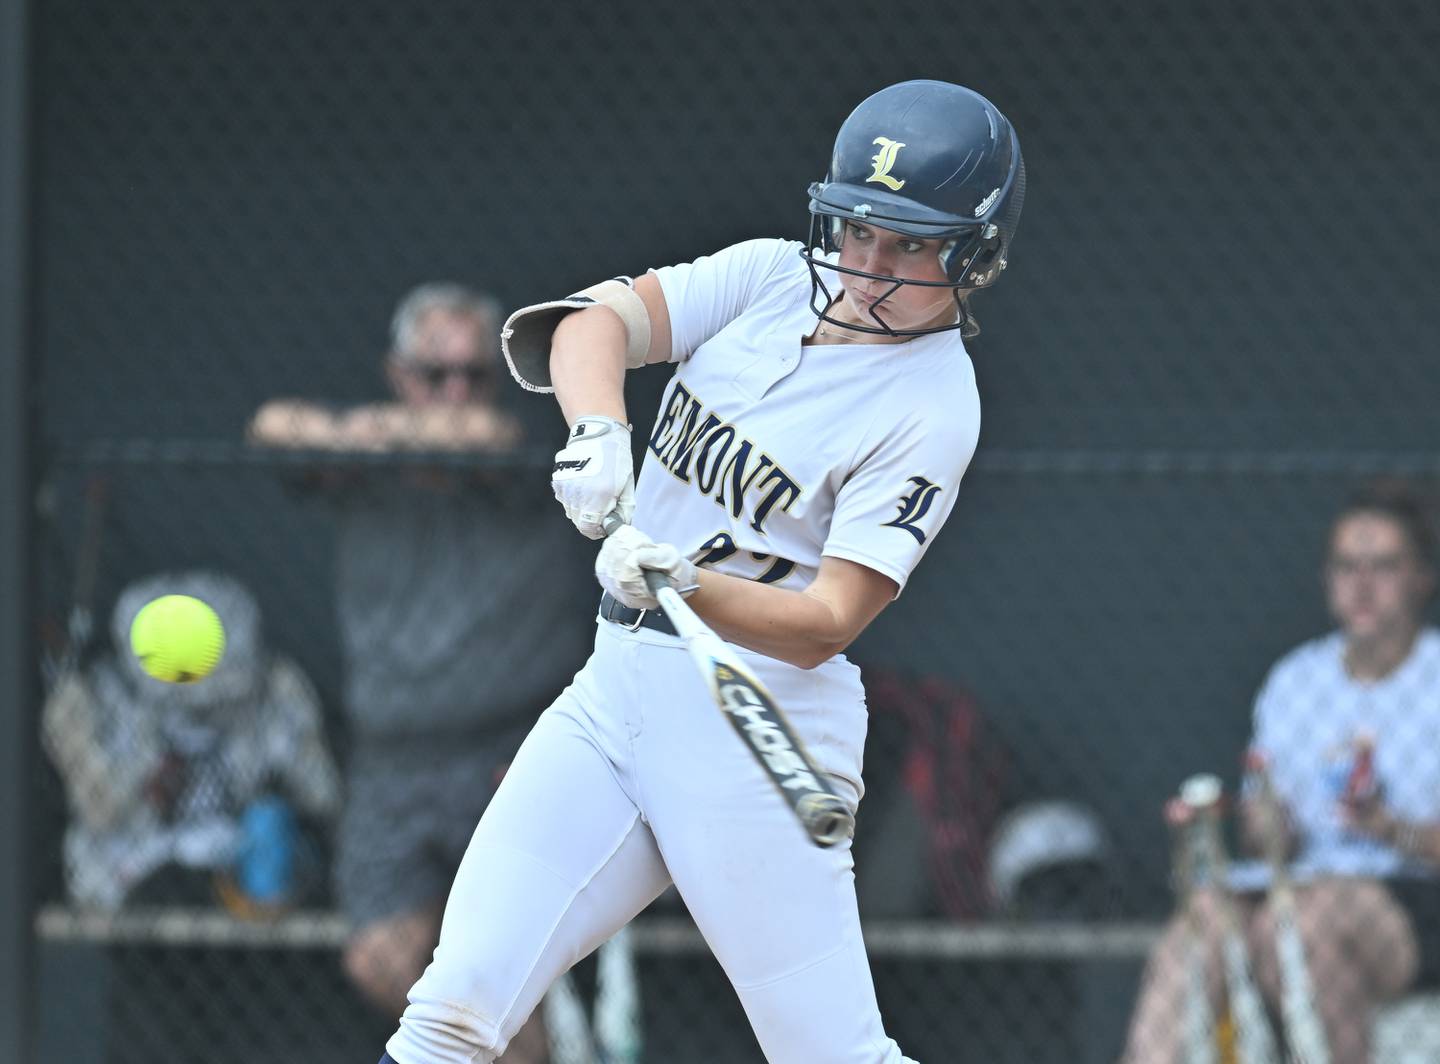 Lemont's Avaree Taylor at bat during the Lemont Class 3A sectional semifinal game against Joliet Catholic on Wednesday, May. 31, 2023, at Lemont.